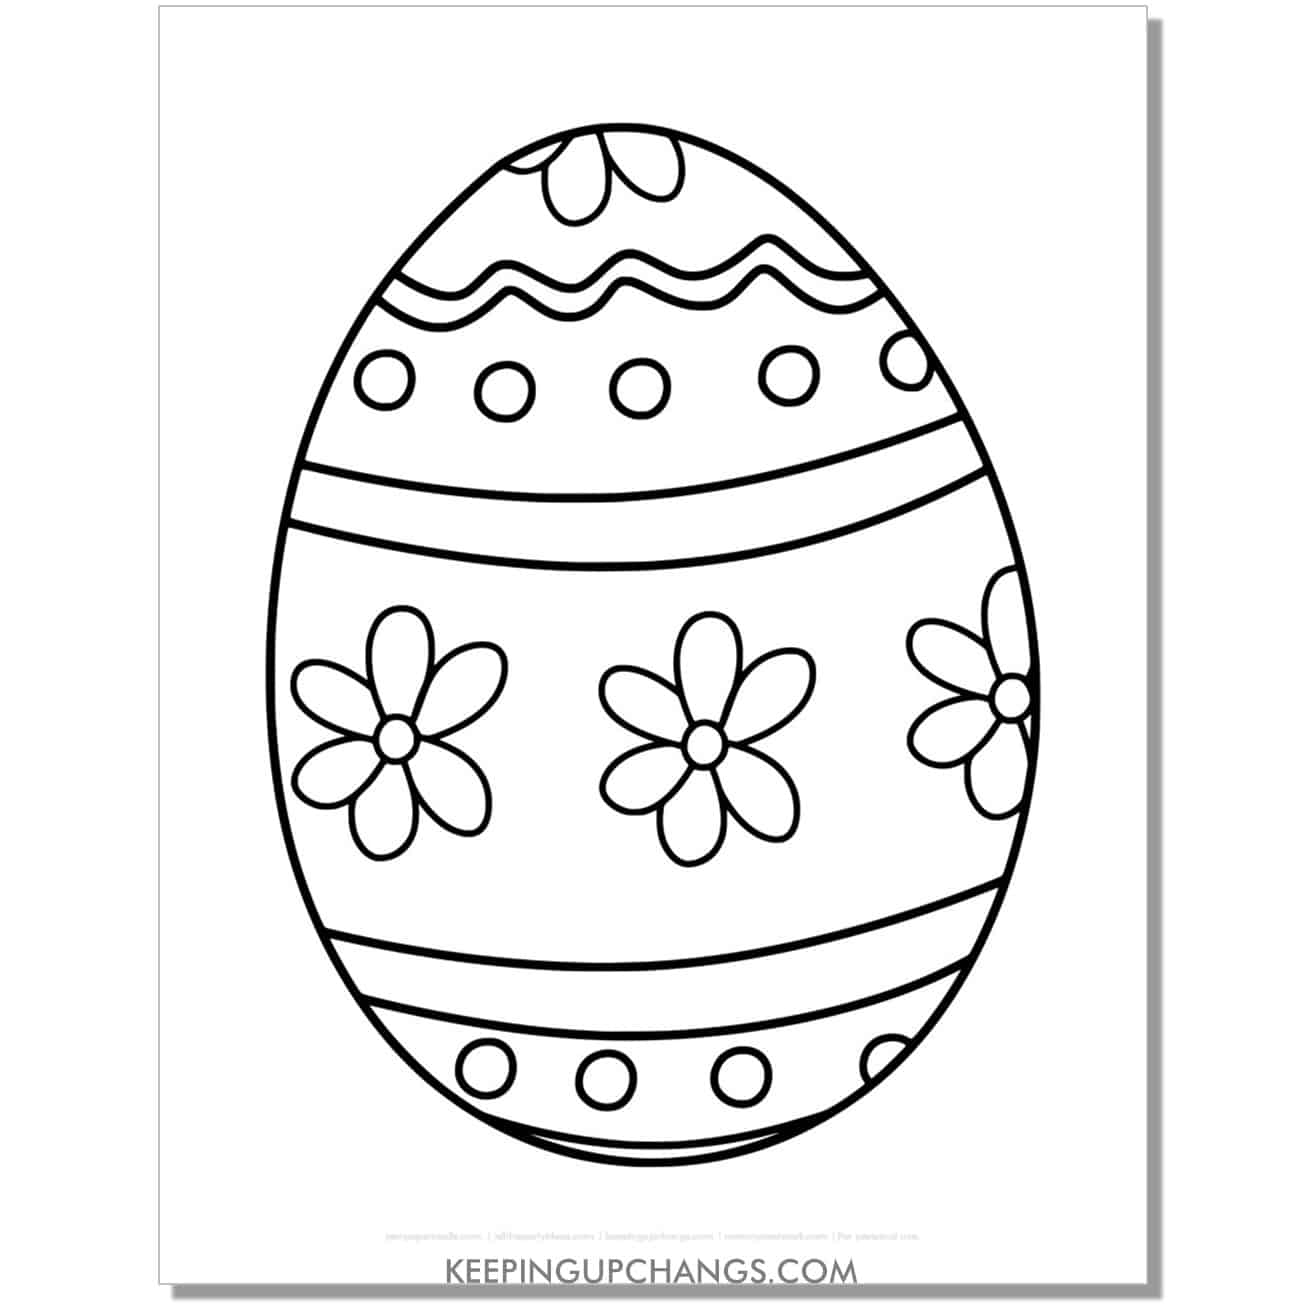 free large easter egg with flower petals and dots coloring page, sheet.